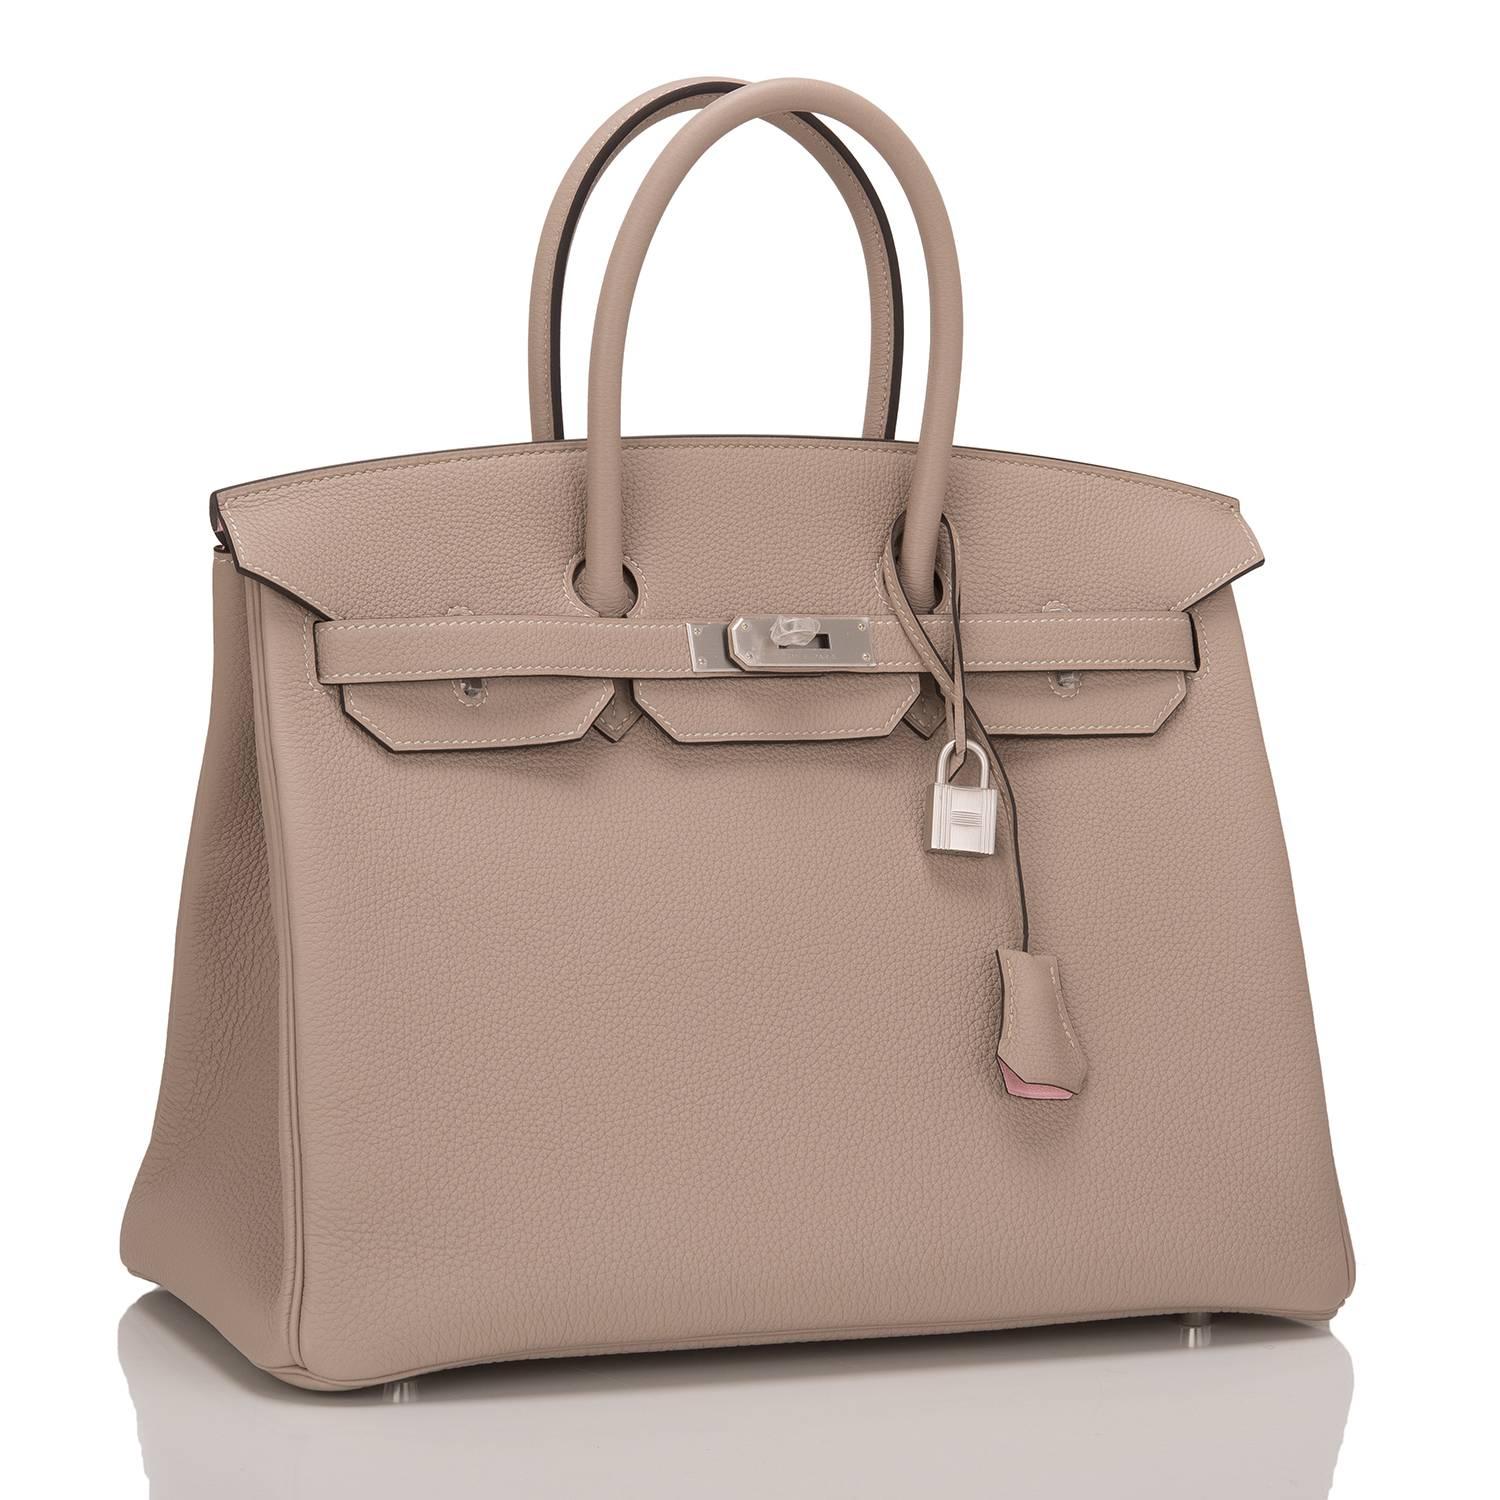 Hermes Special Order Horseshoe Stamped Gris Tourterelle 35cm in togo (bull) leather with brushed silver hardware.

This Birkin features tonal stitching, front toggle closure, clochette with lock and two keys, and double rolled handles.

The